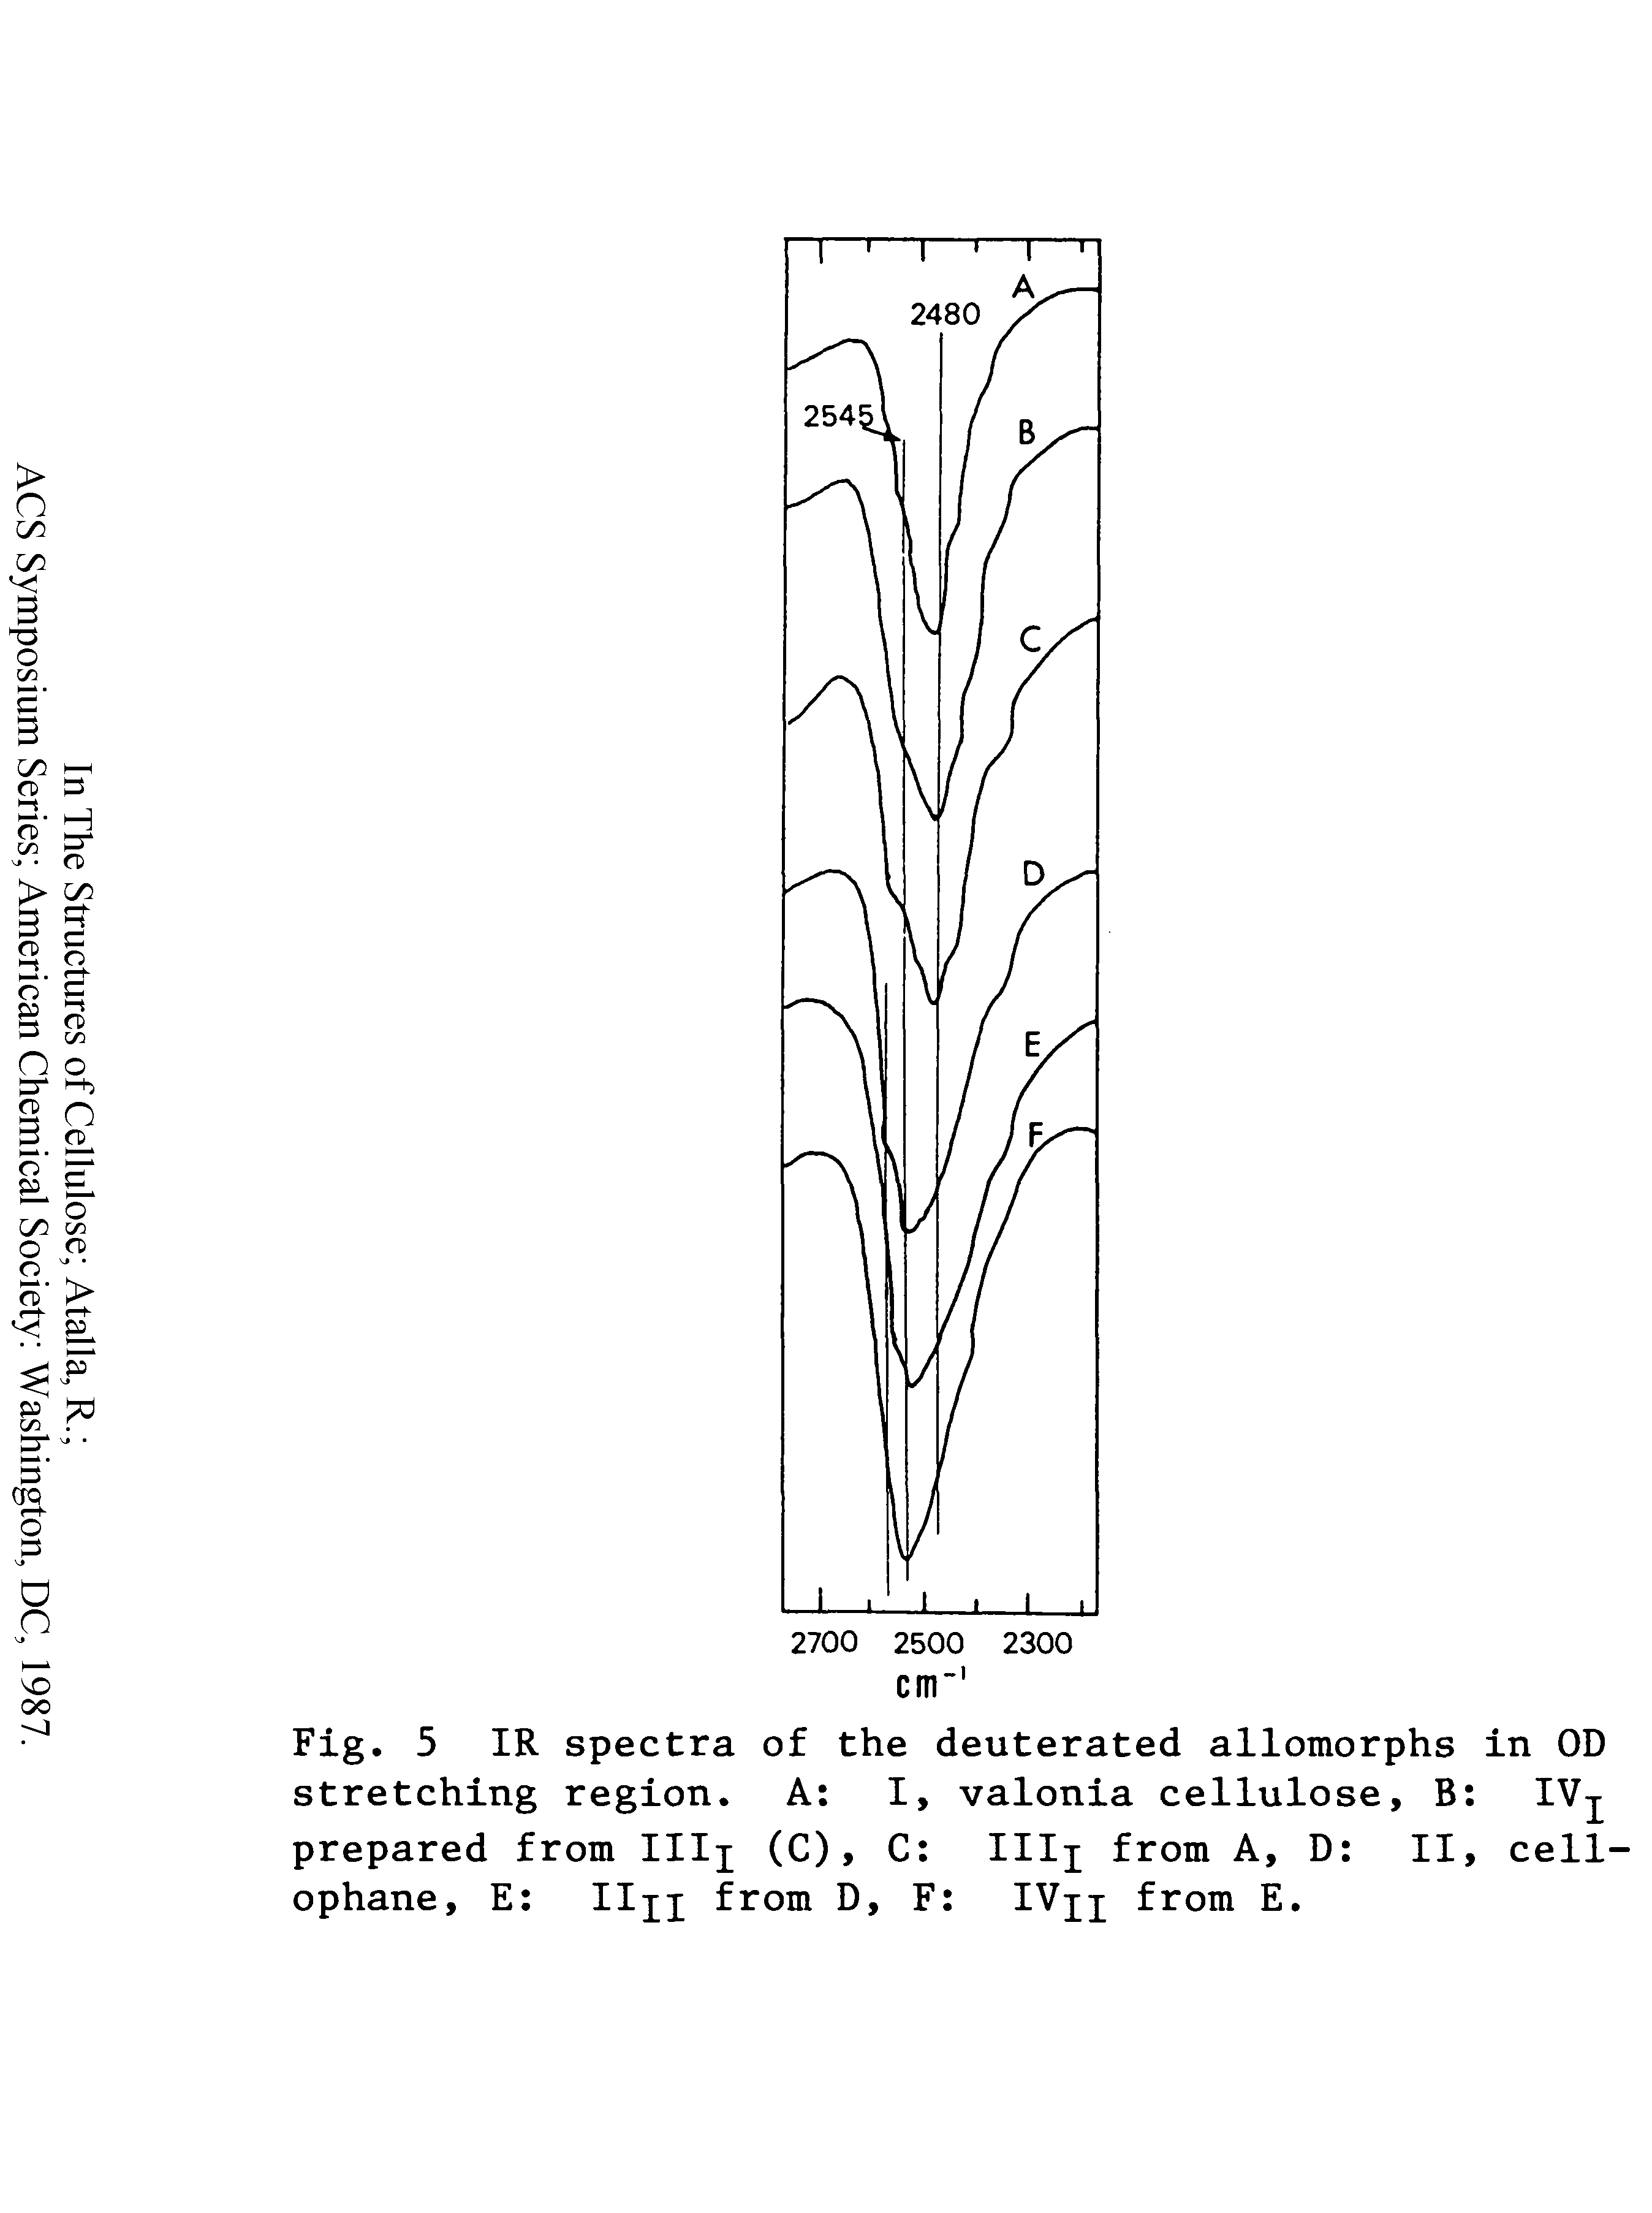 Fig. 5 IR spectra of the deuterated allomorphs in OD stretching region. A I, valonia cellulose, B IV prepared from IHi (C), C IHi from A, D II, ophane, E Hn from D, F IVxi E.